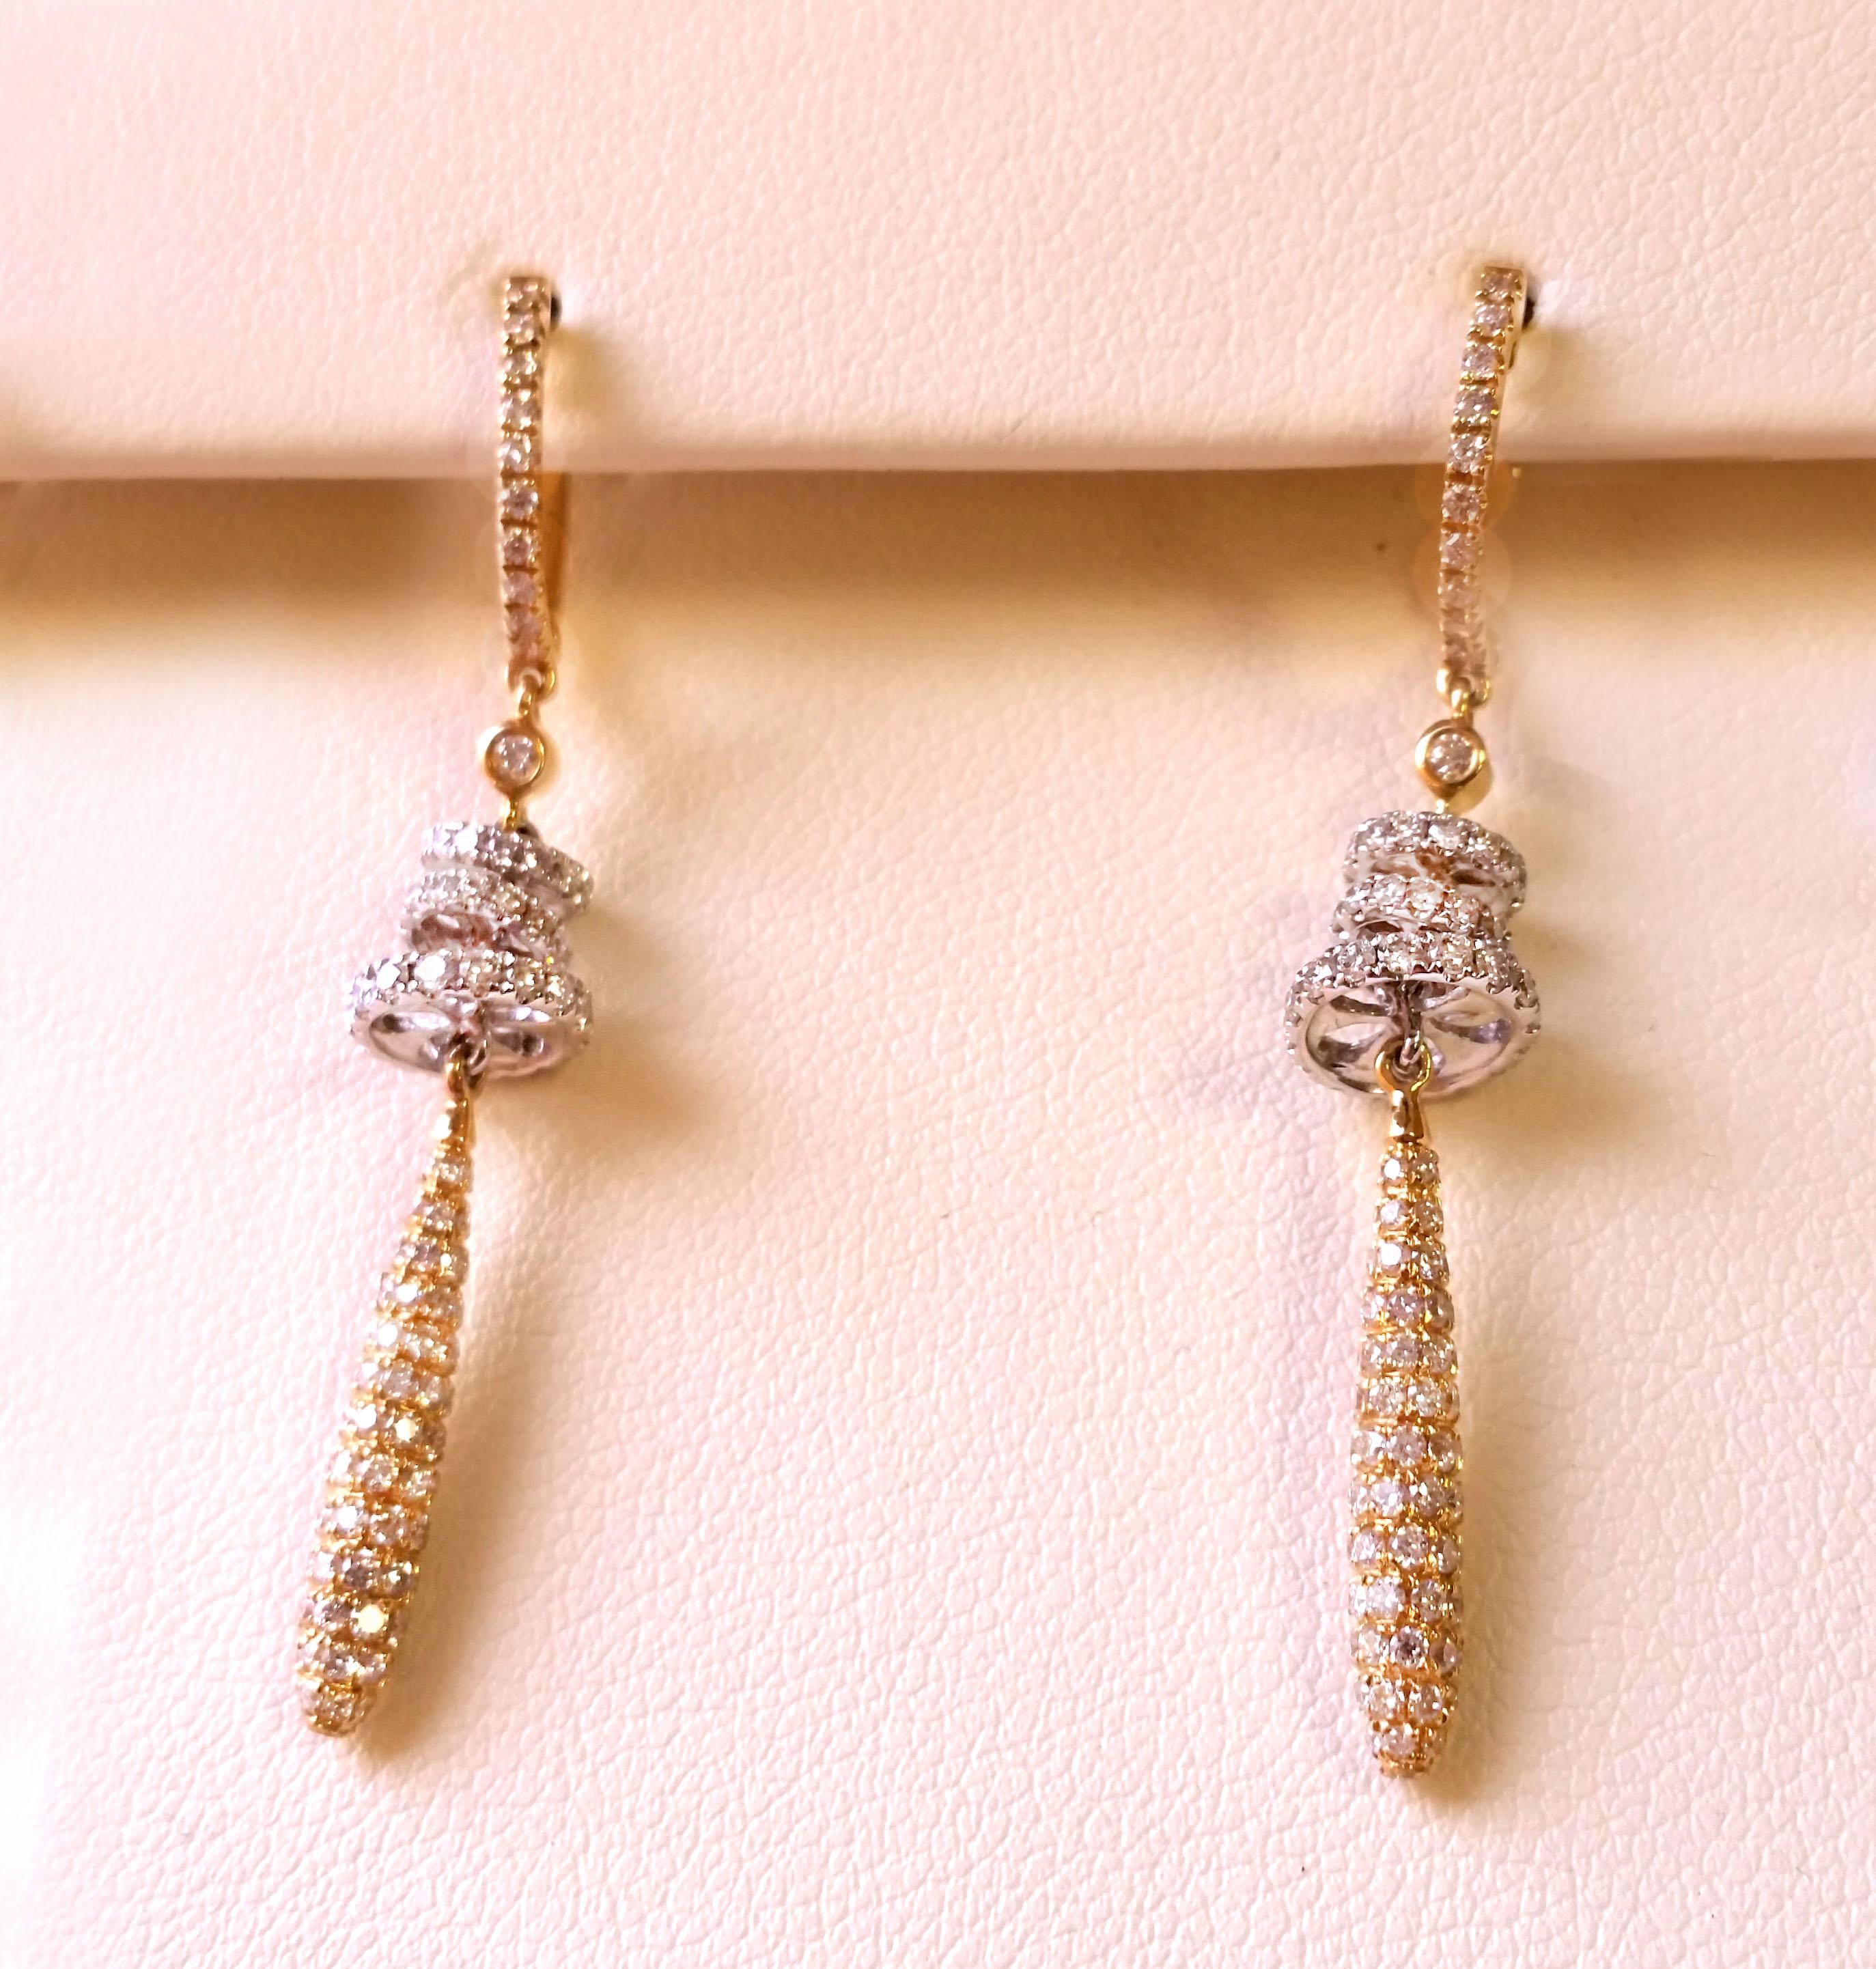 Vitolo 18 Karat Gold Diamond Rondel Drop Earrings In New Condition For Sale In Los Angeles, CA